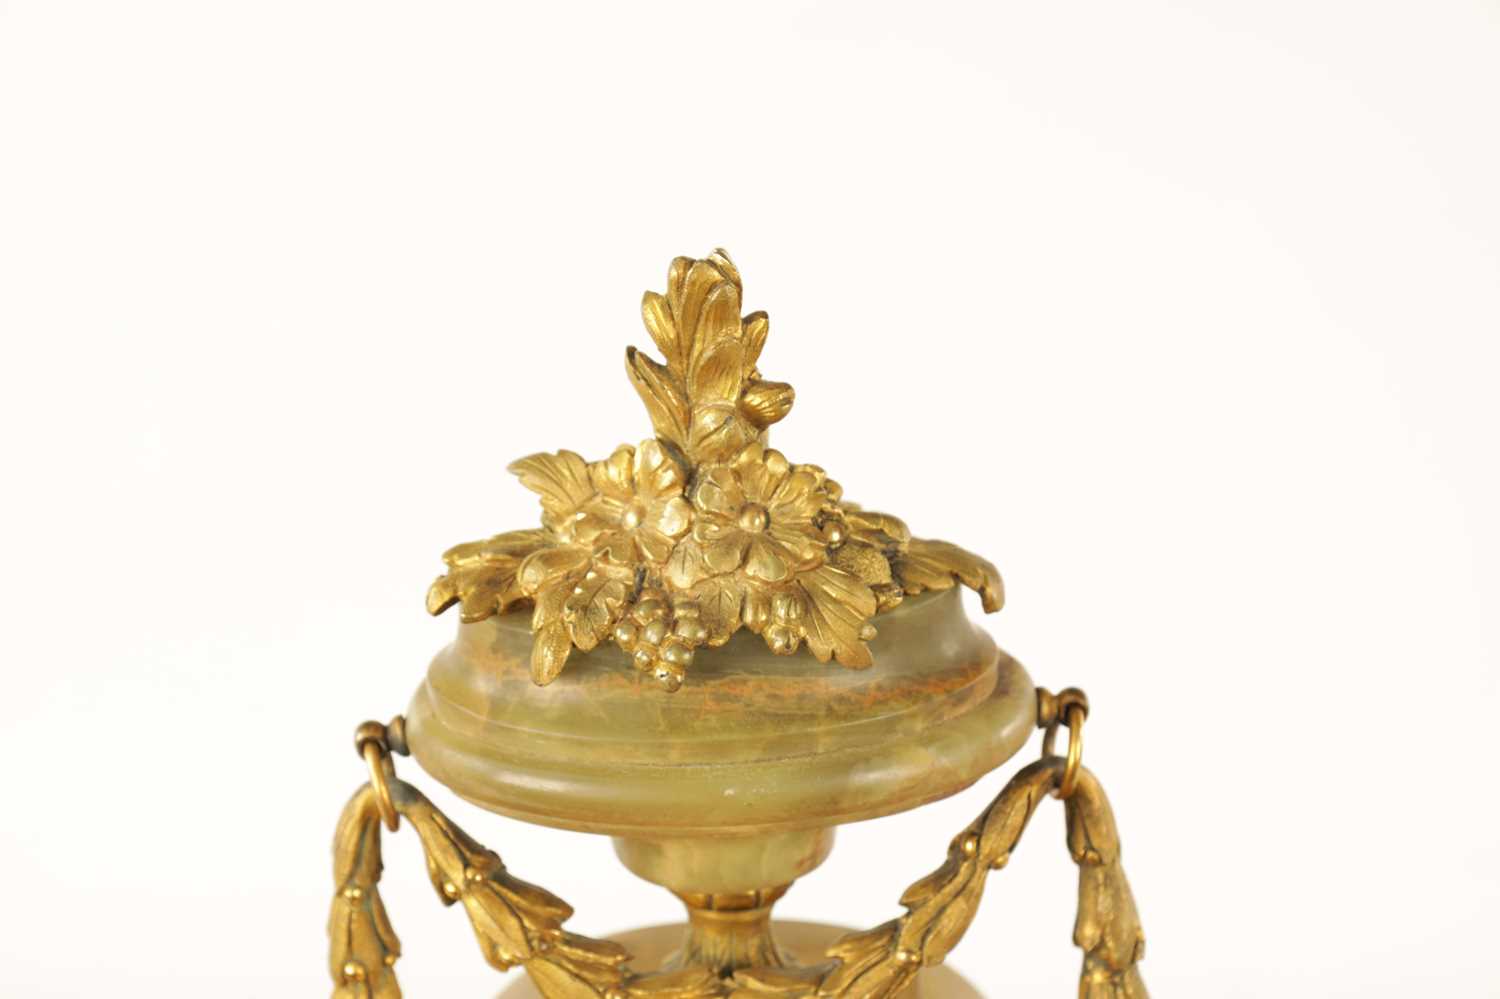 A LATE 19TH CENTURY FRENCH ORMOLU AND ONYX MANTEL CLOCK - Image 4 of 12